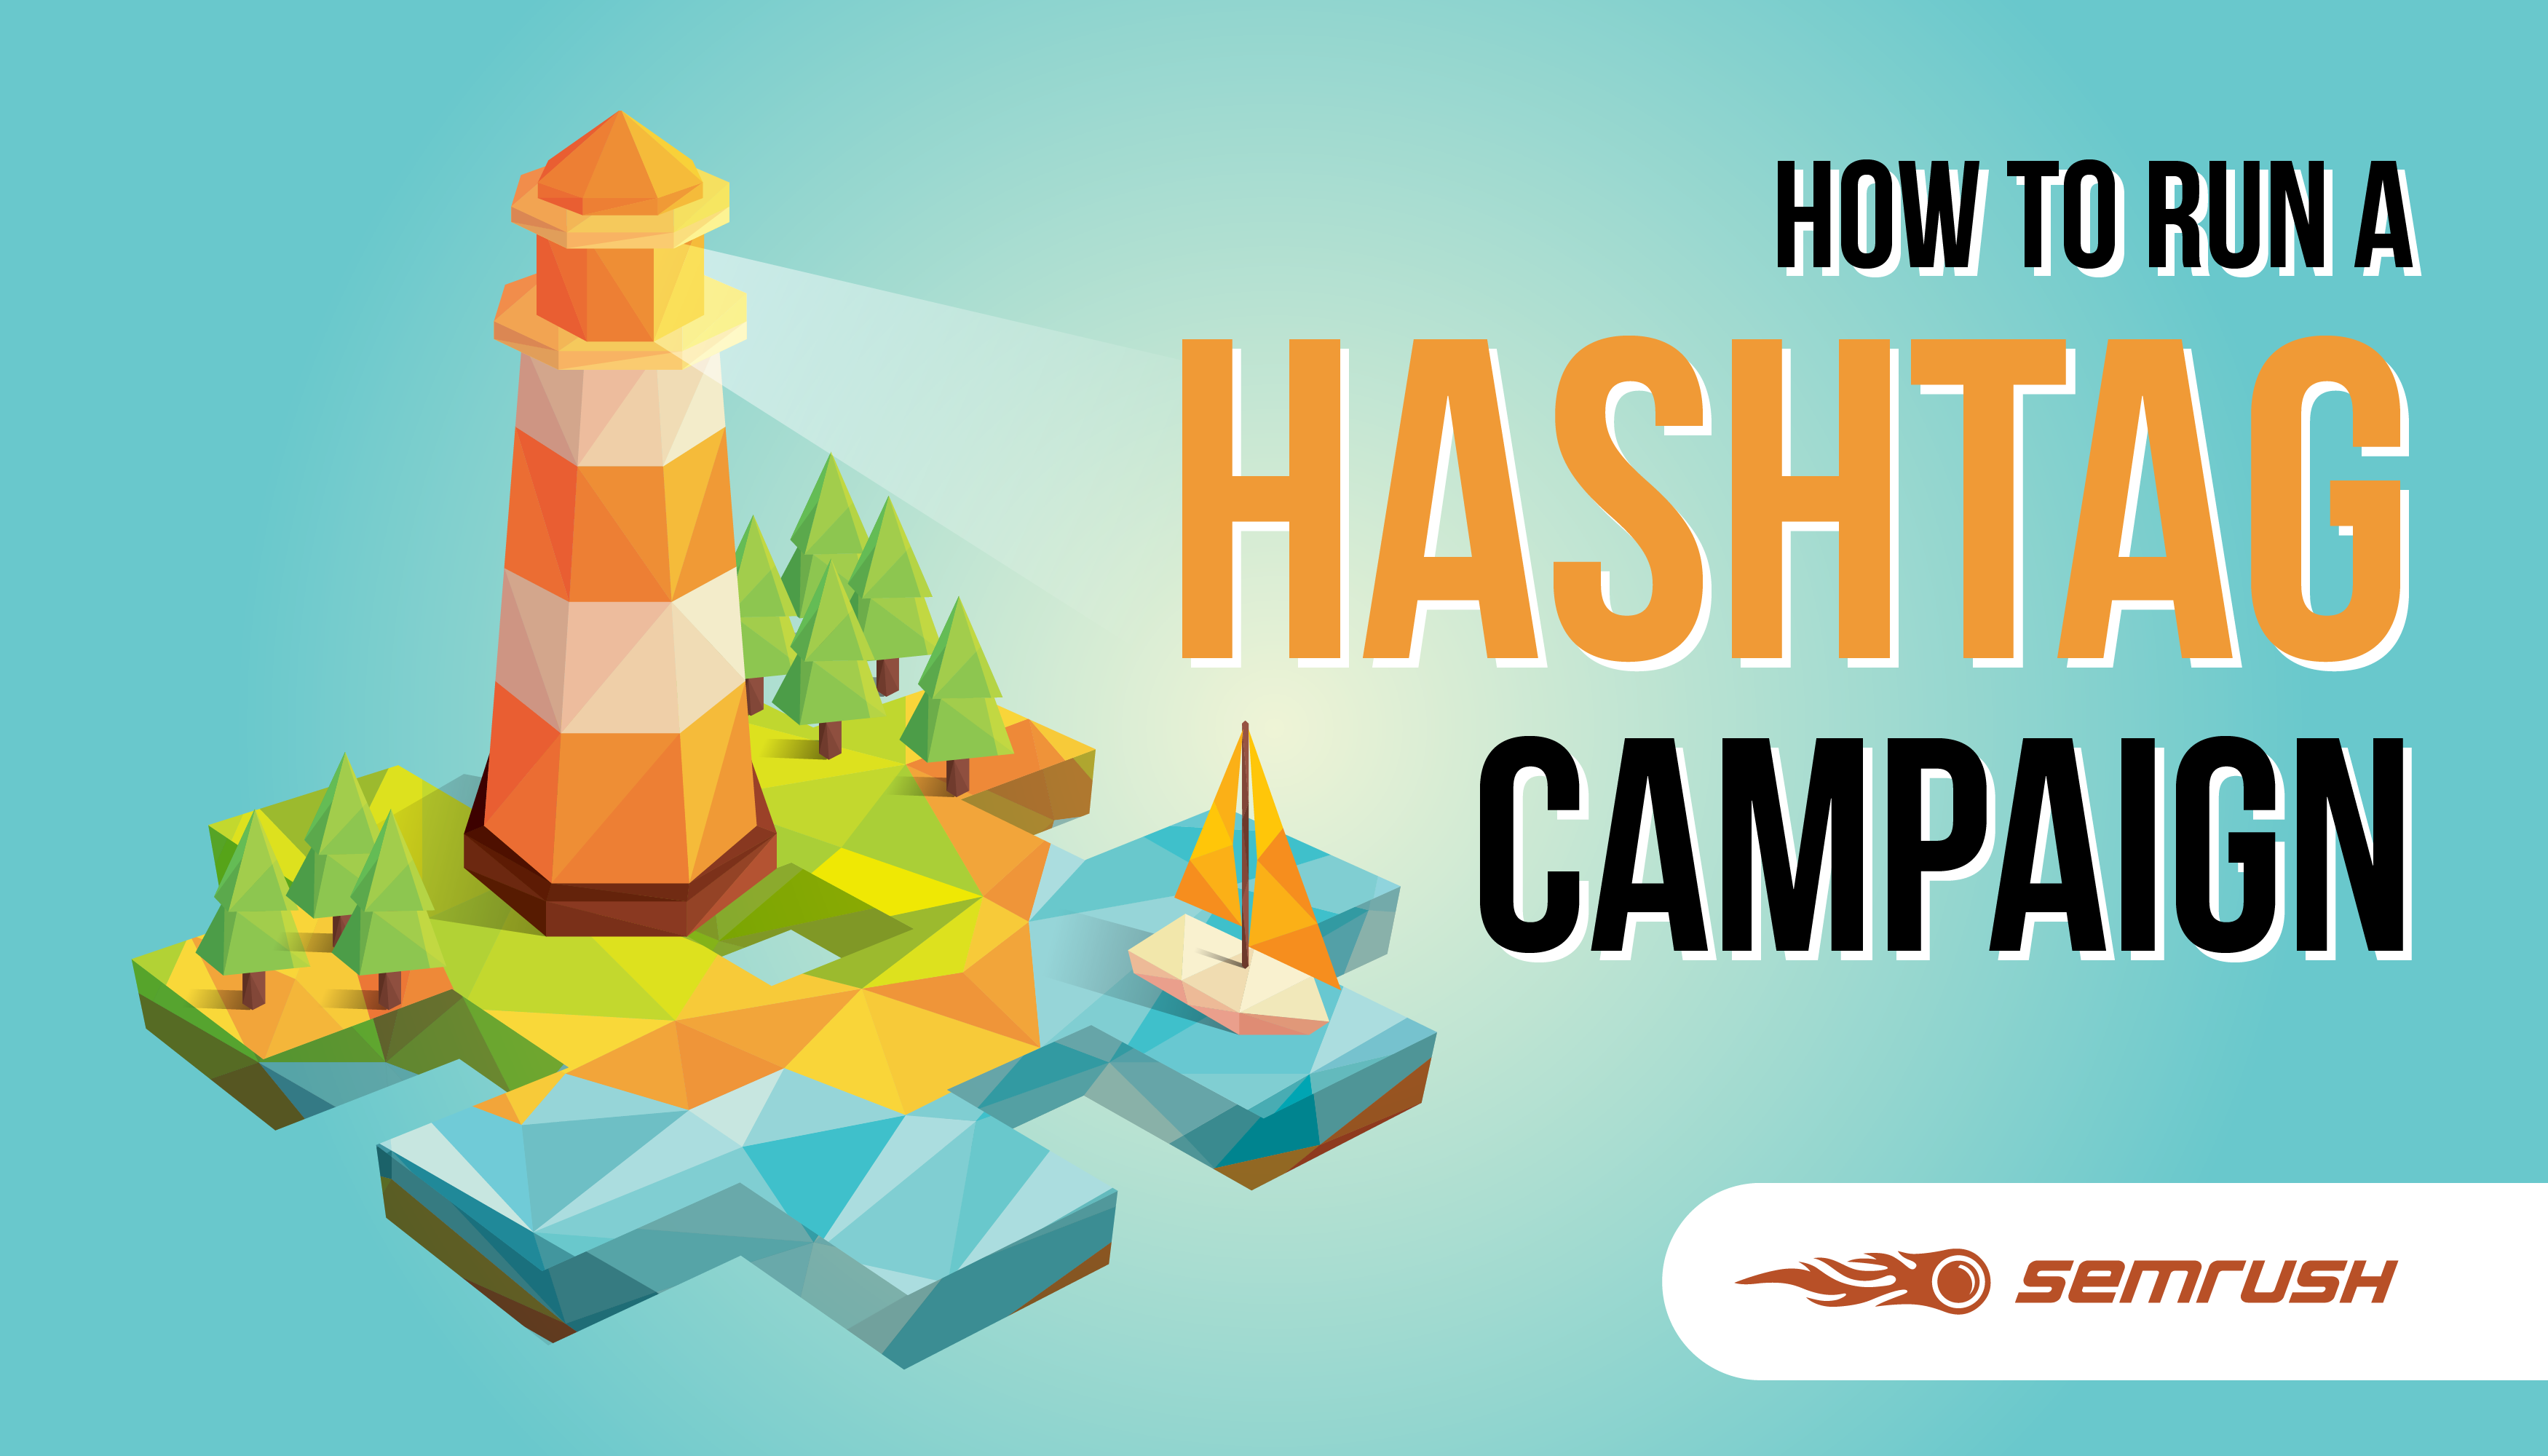 How To Run a Hashtag Campaign